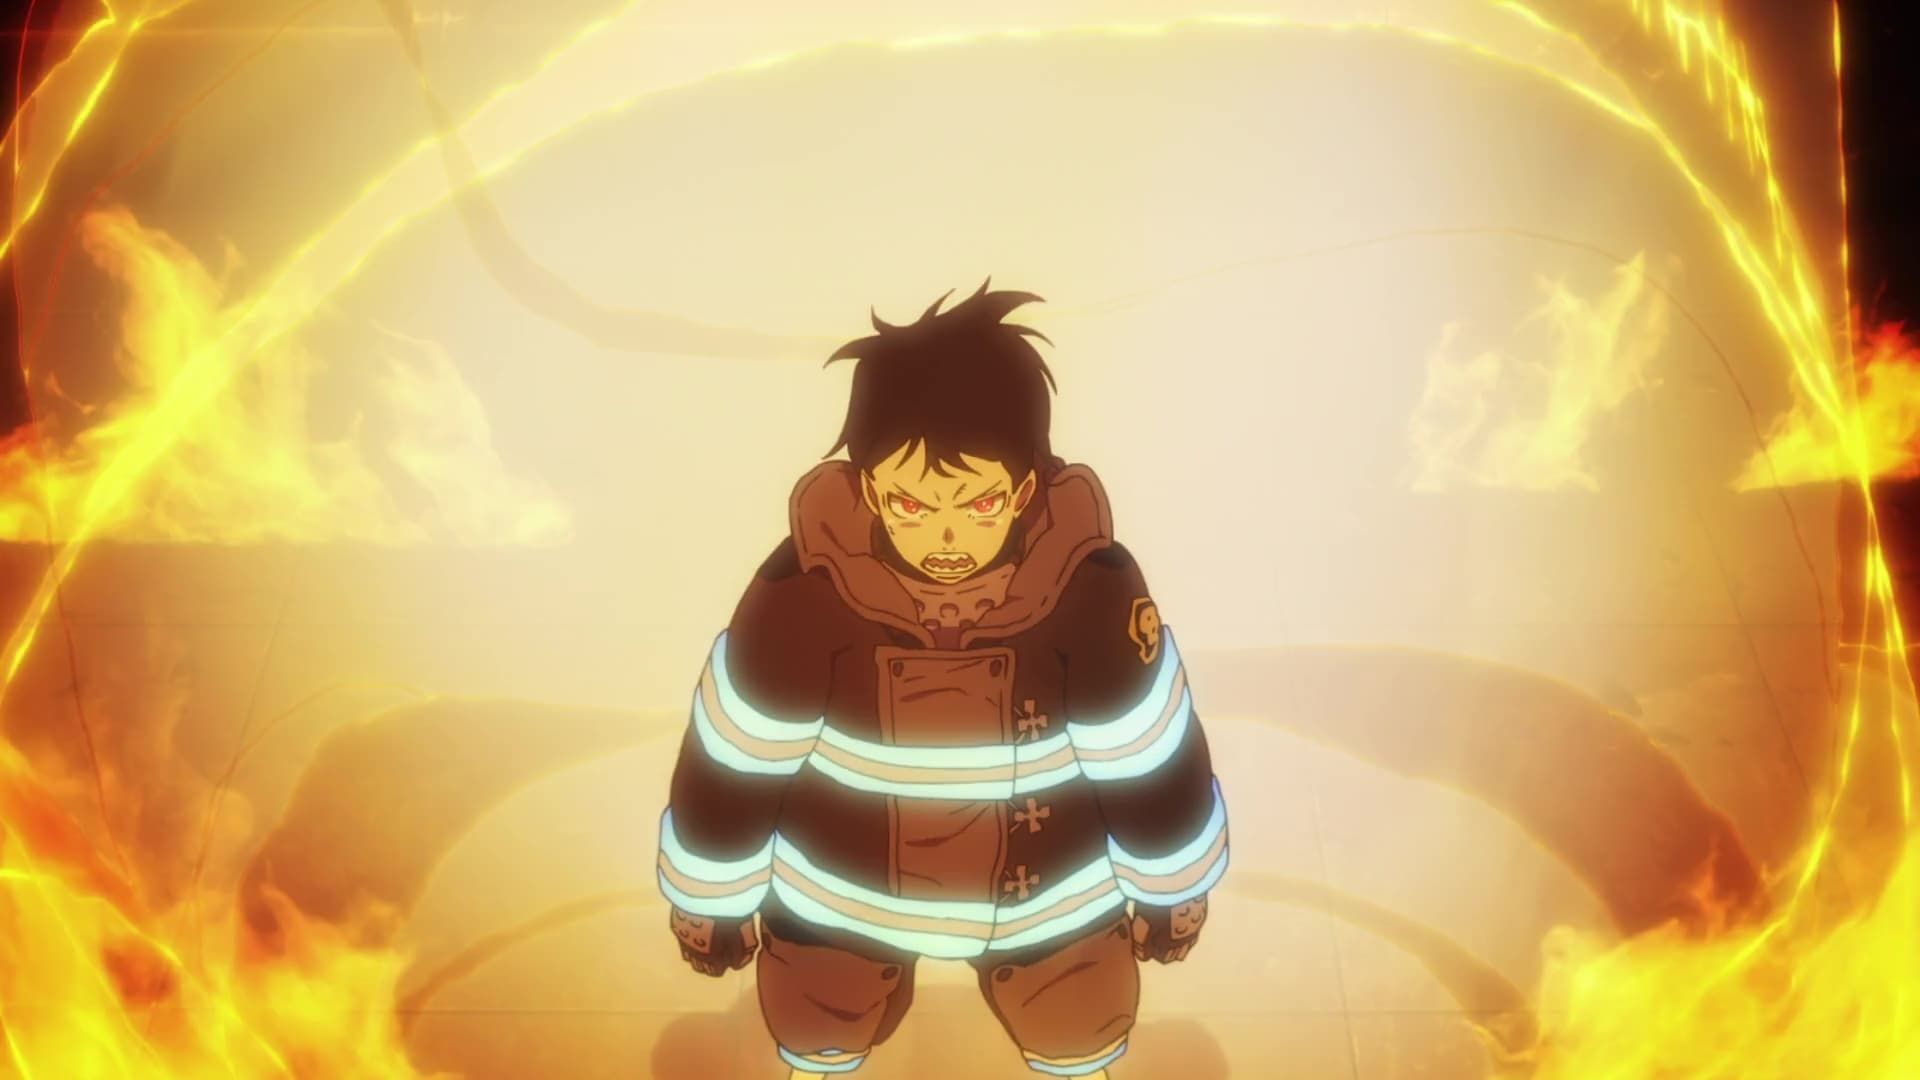 Watch Fire Force Episode 3 Online - The Rookie Fire Soldier Games